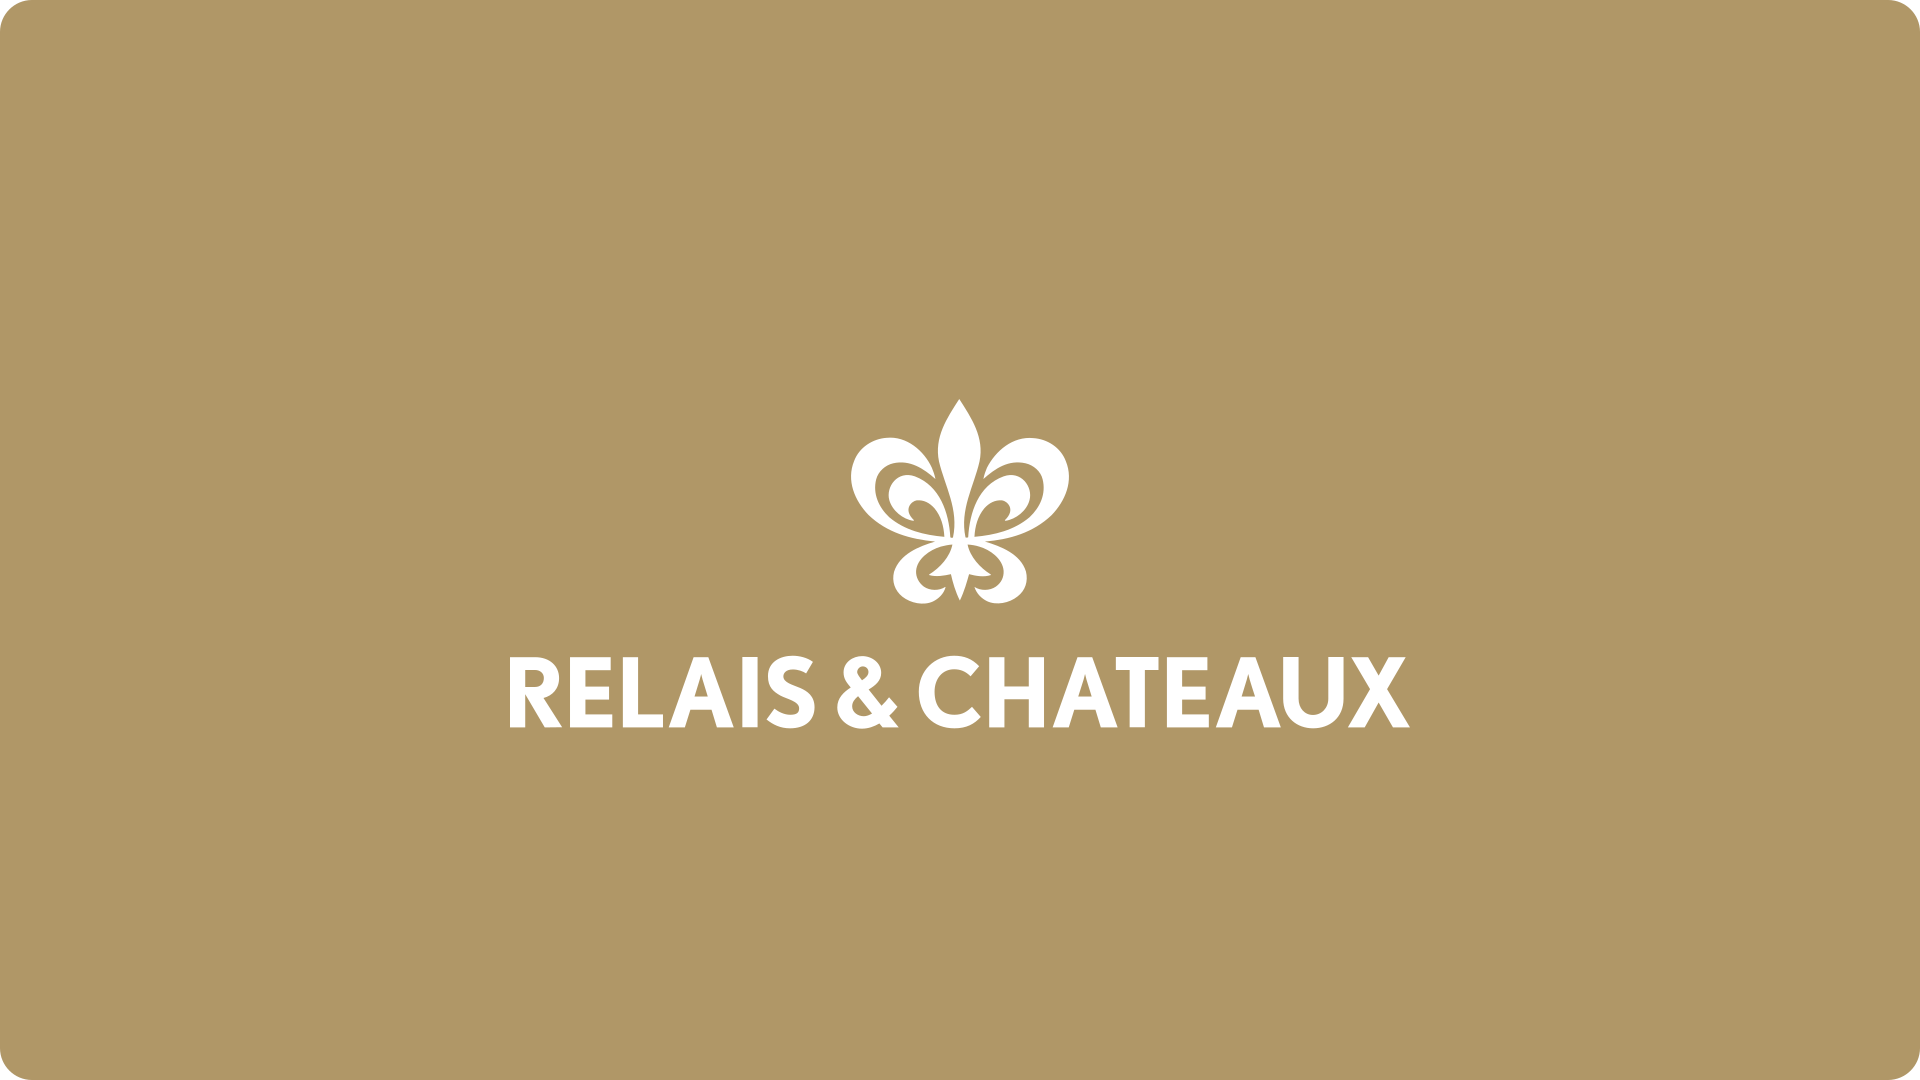 Selfbook Officially Partners with Relais & Châteaux